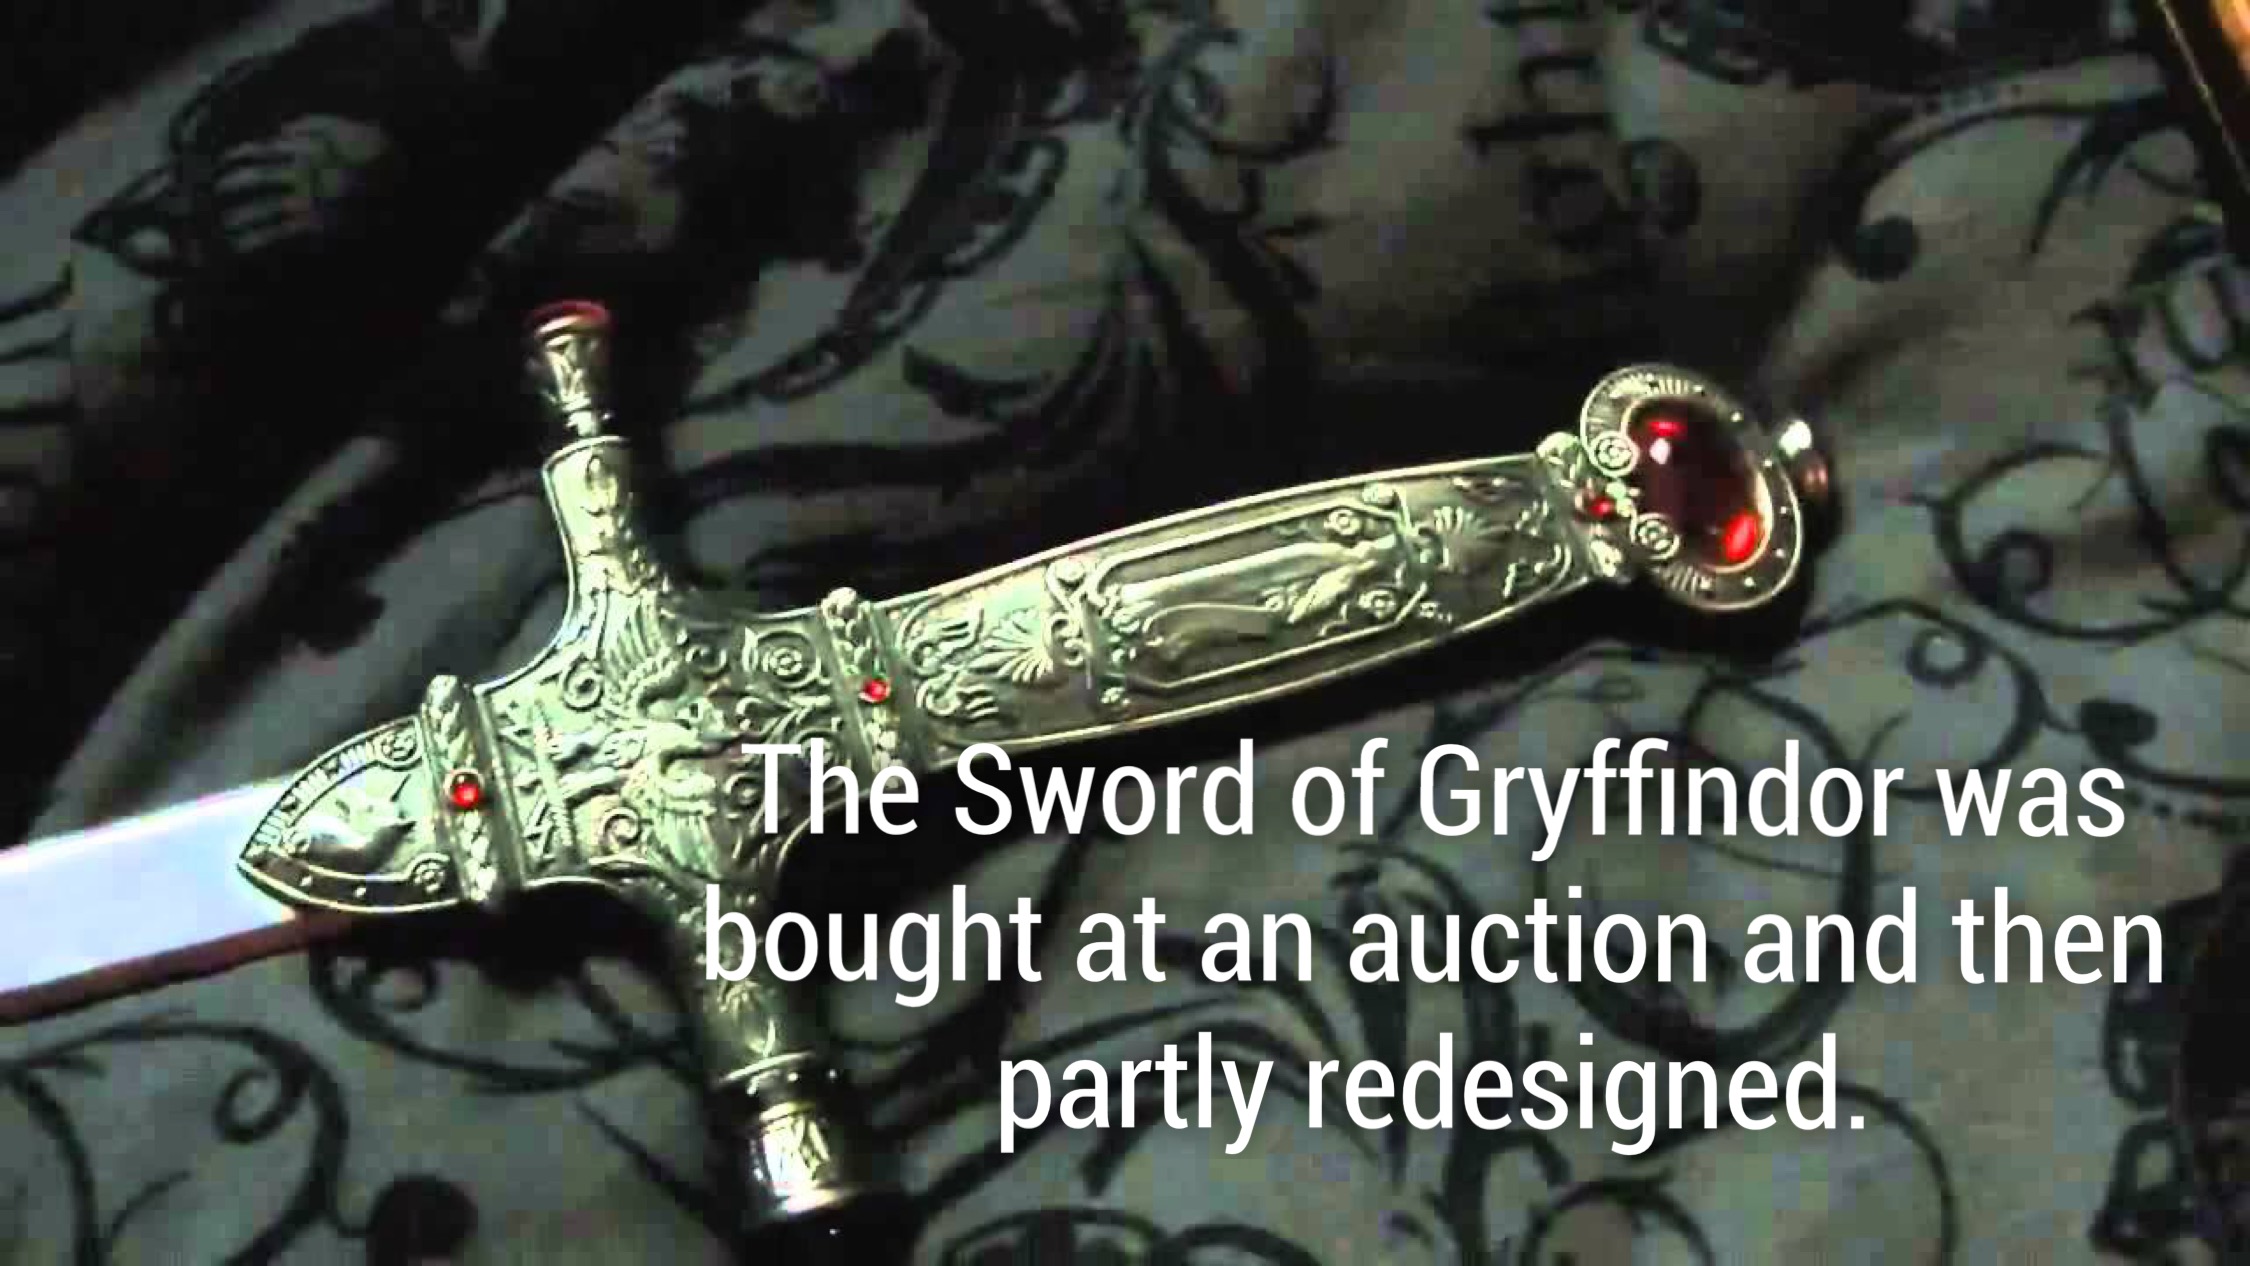 harry potter schwert von gryffindor - Sa The Sword of Gryffindor was bought at an auction and then A partly redesigned.